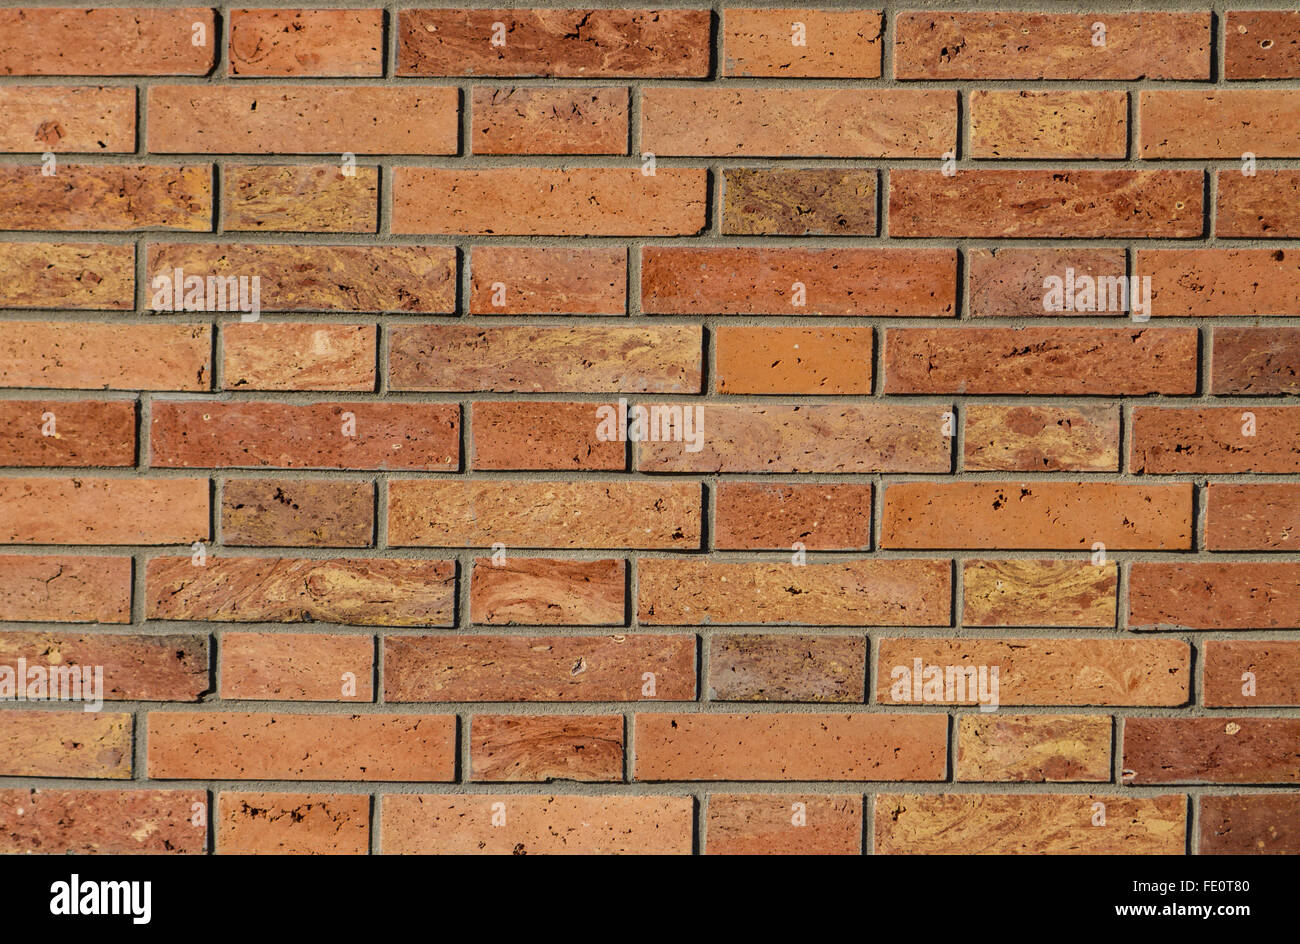 Detail of the brick wall Stock Photo